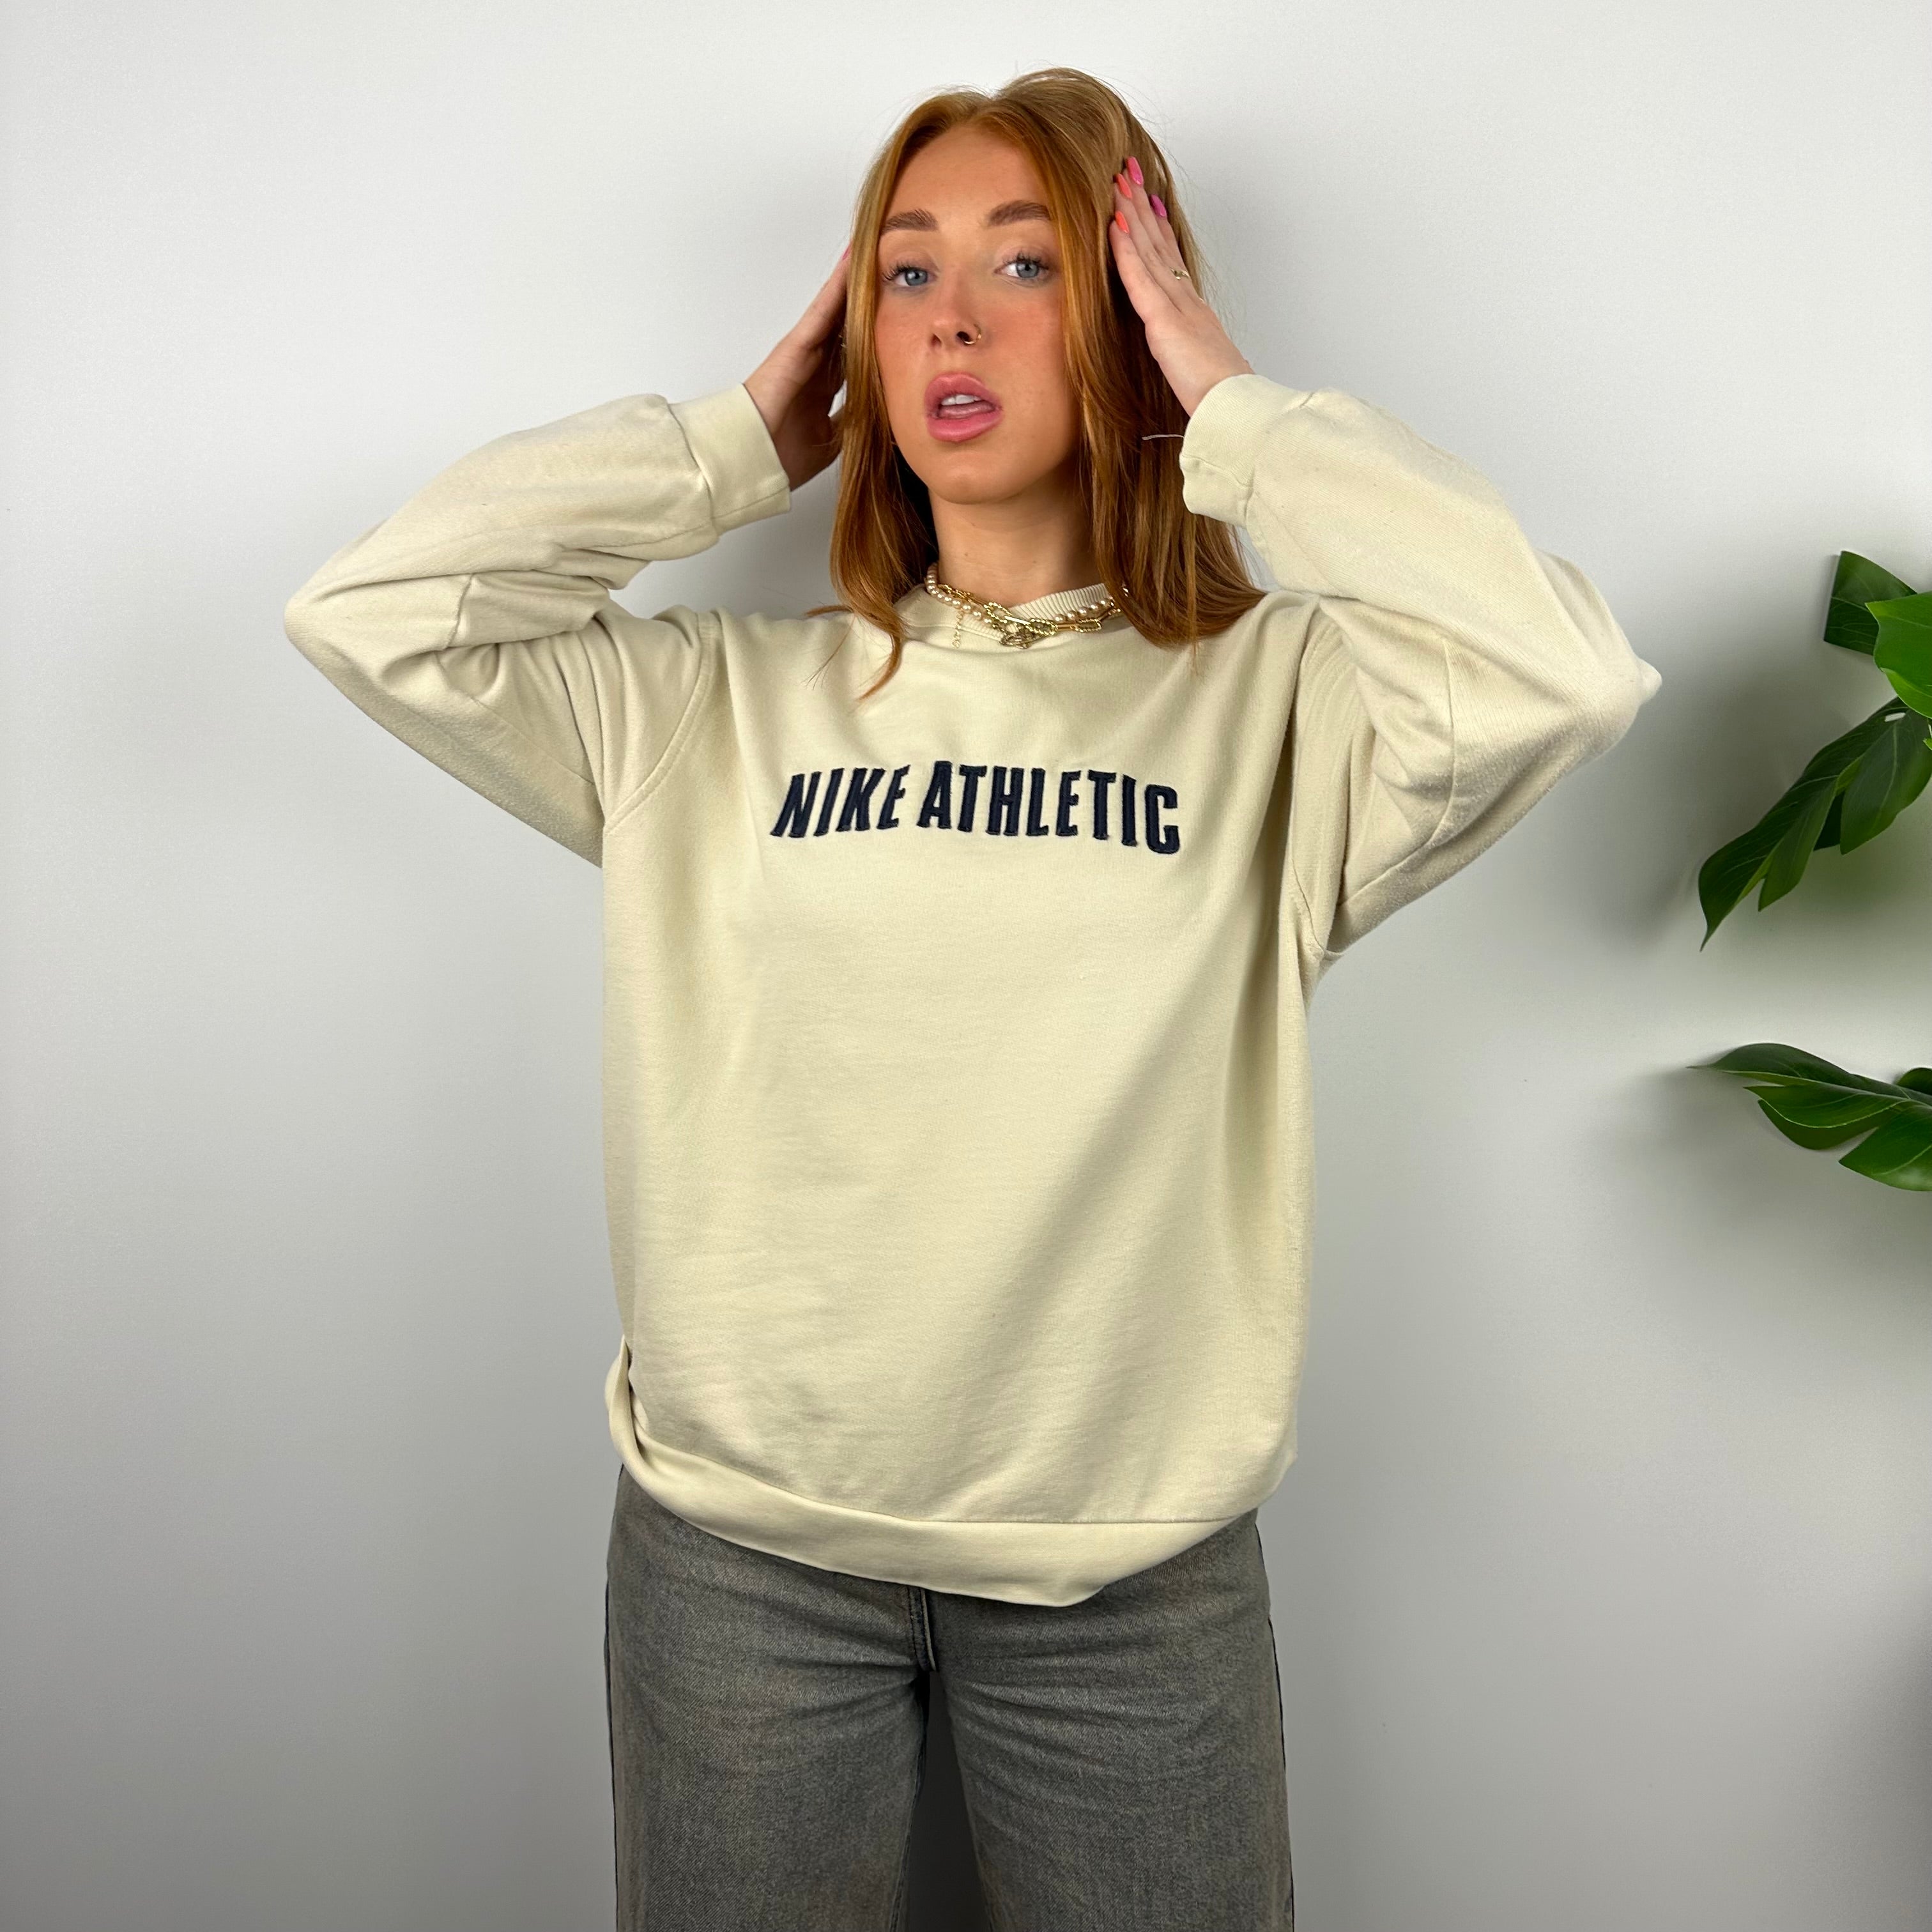 Nike Athletic RARE Cream Embroidered Spell Out Sweatshirt (S)